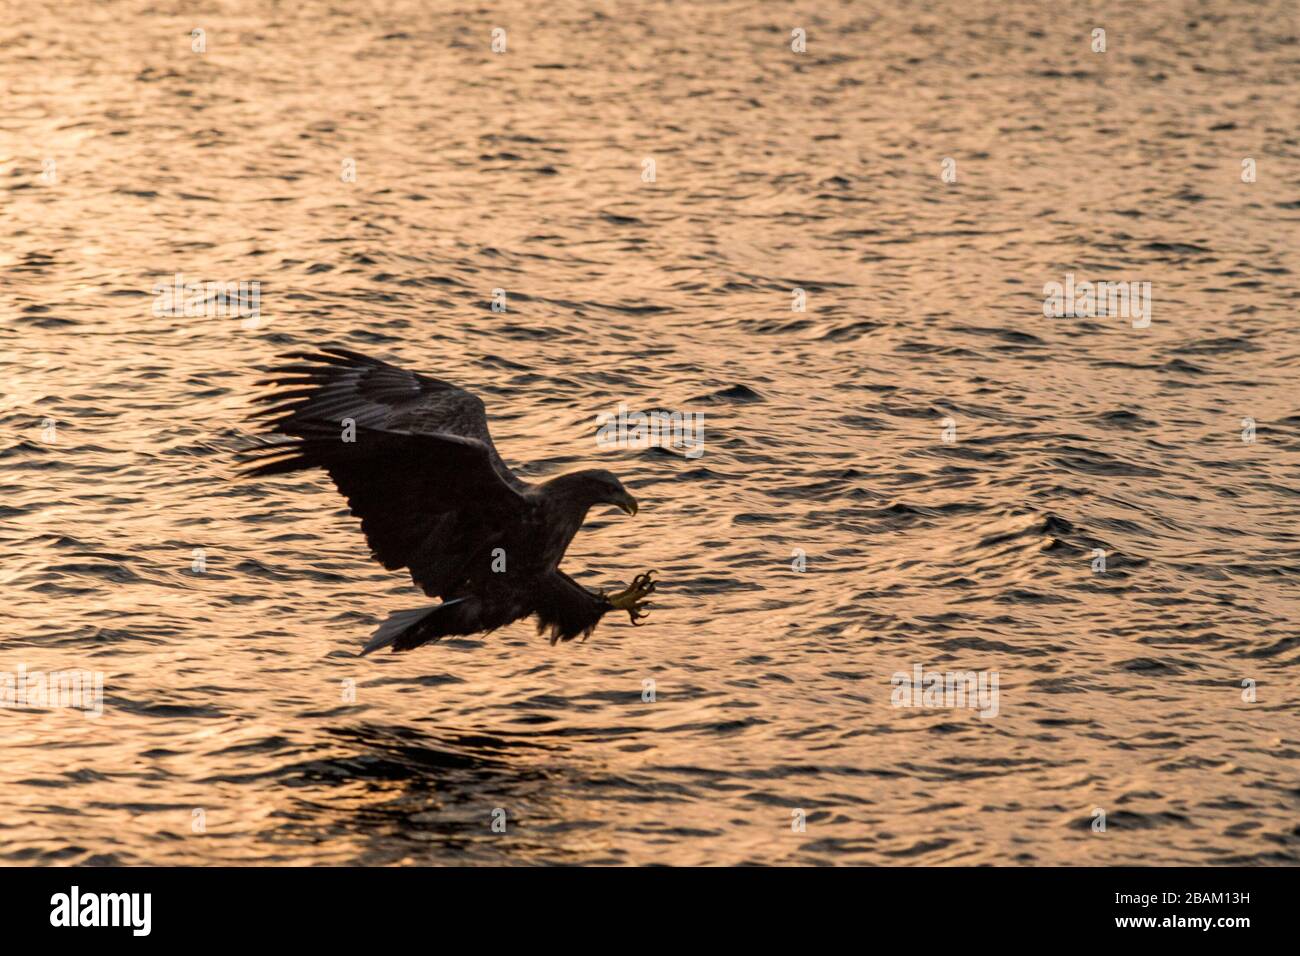 White-tailed eagle in flight hunting fish from sea,Hokkaido, Japan, Haliaeetus albicilla, majestic sea eagle with big claws aiming to catch fish from Stock Photo